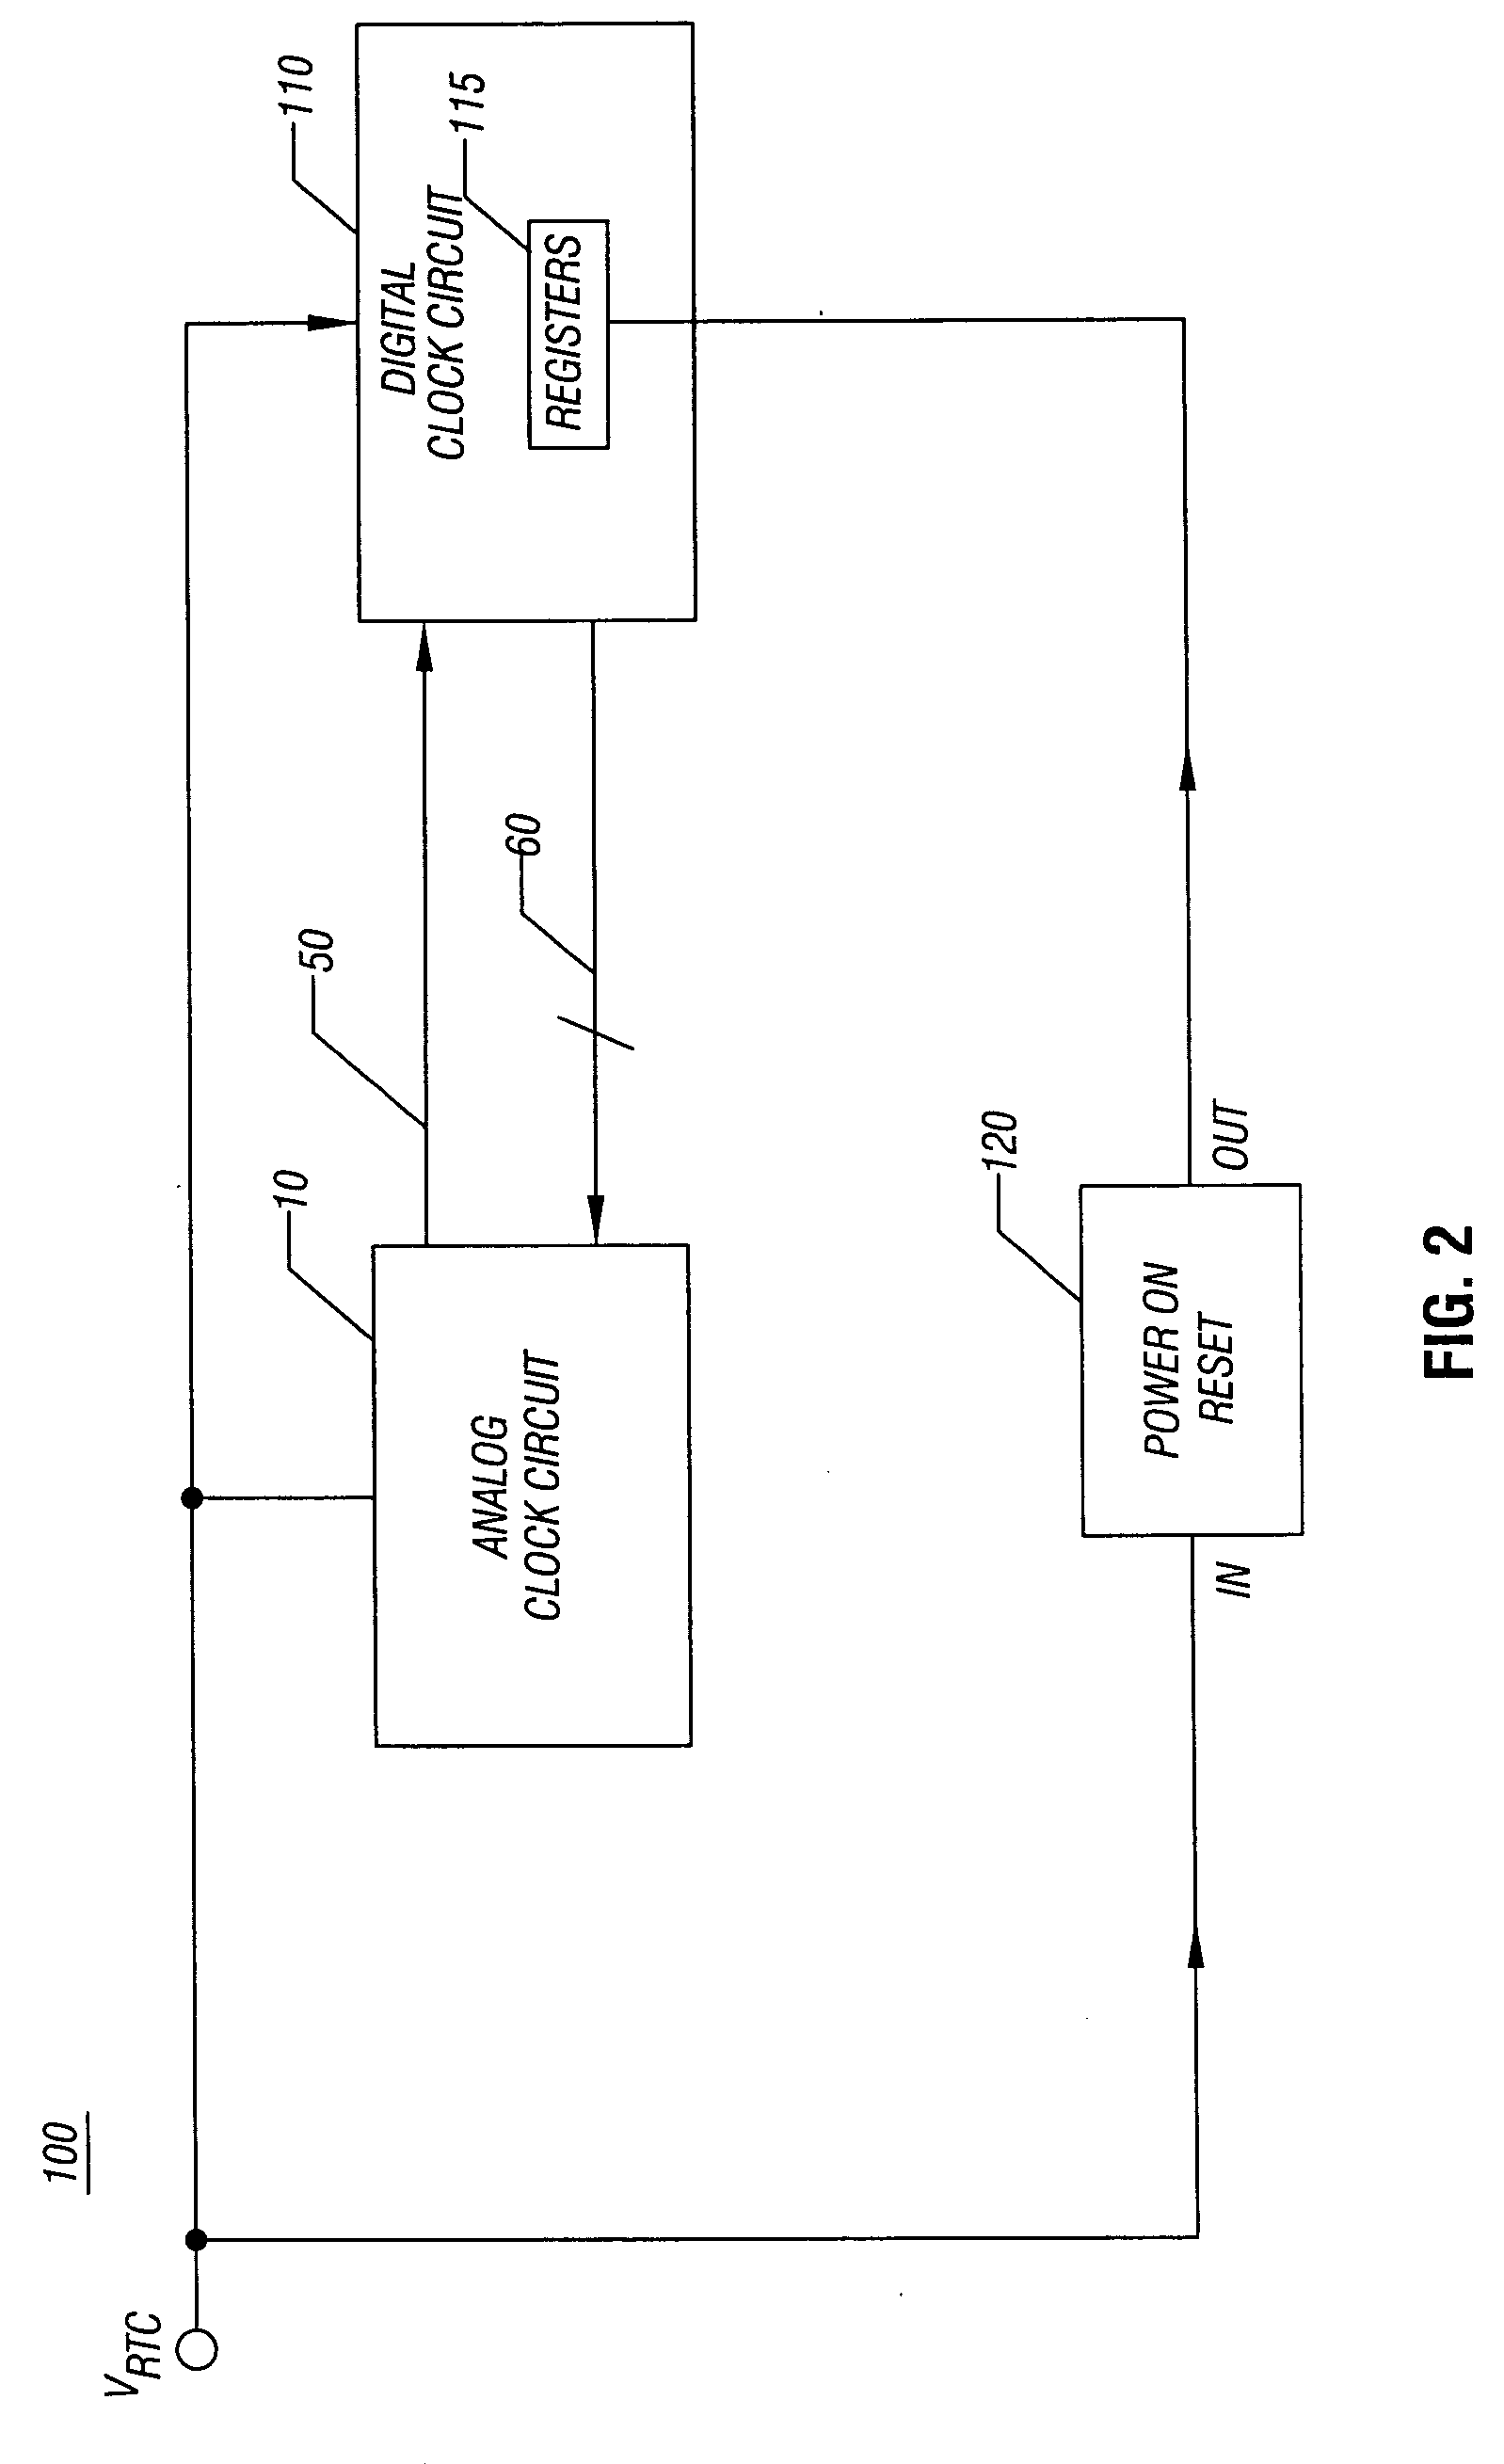 Clock circuit with programmable load capacitors